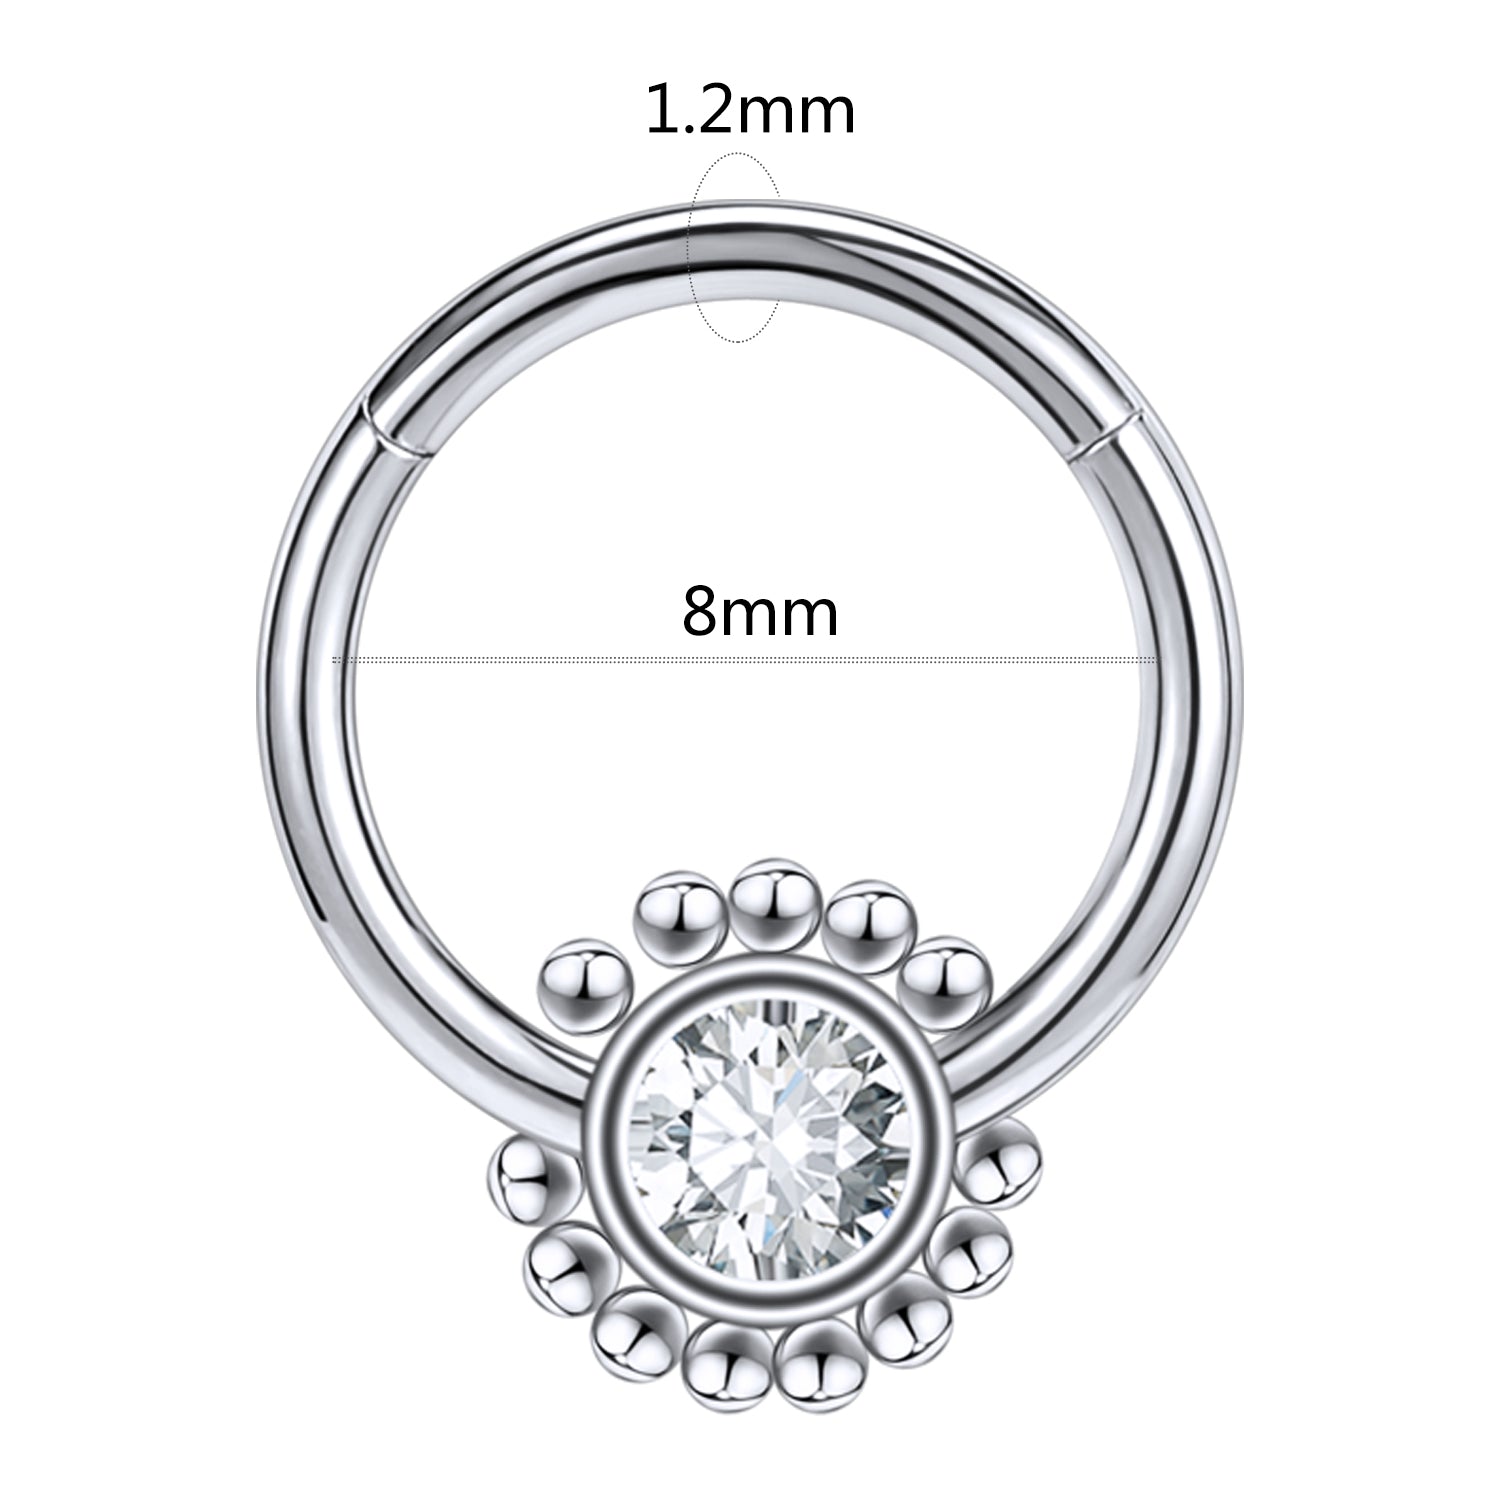 16g-flower-crystal-nose-septum-ring-stainless-steel-clicker-helix-cartilage-piercing